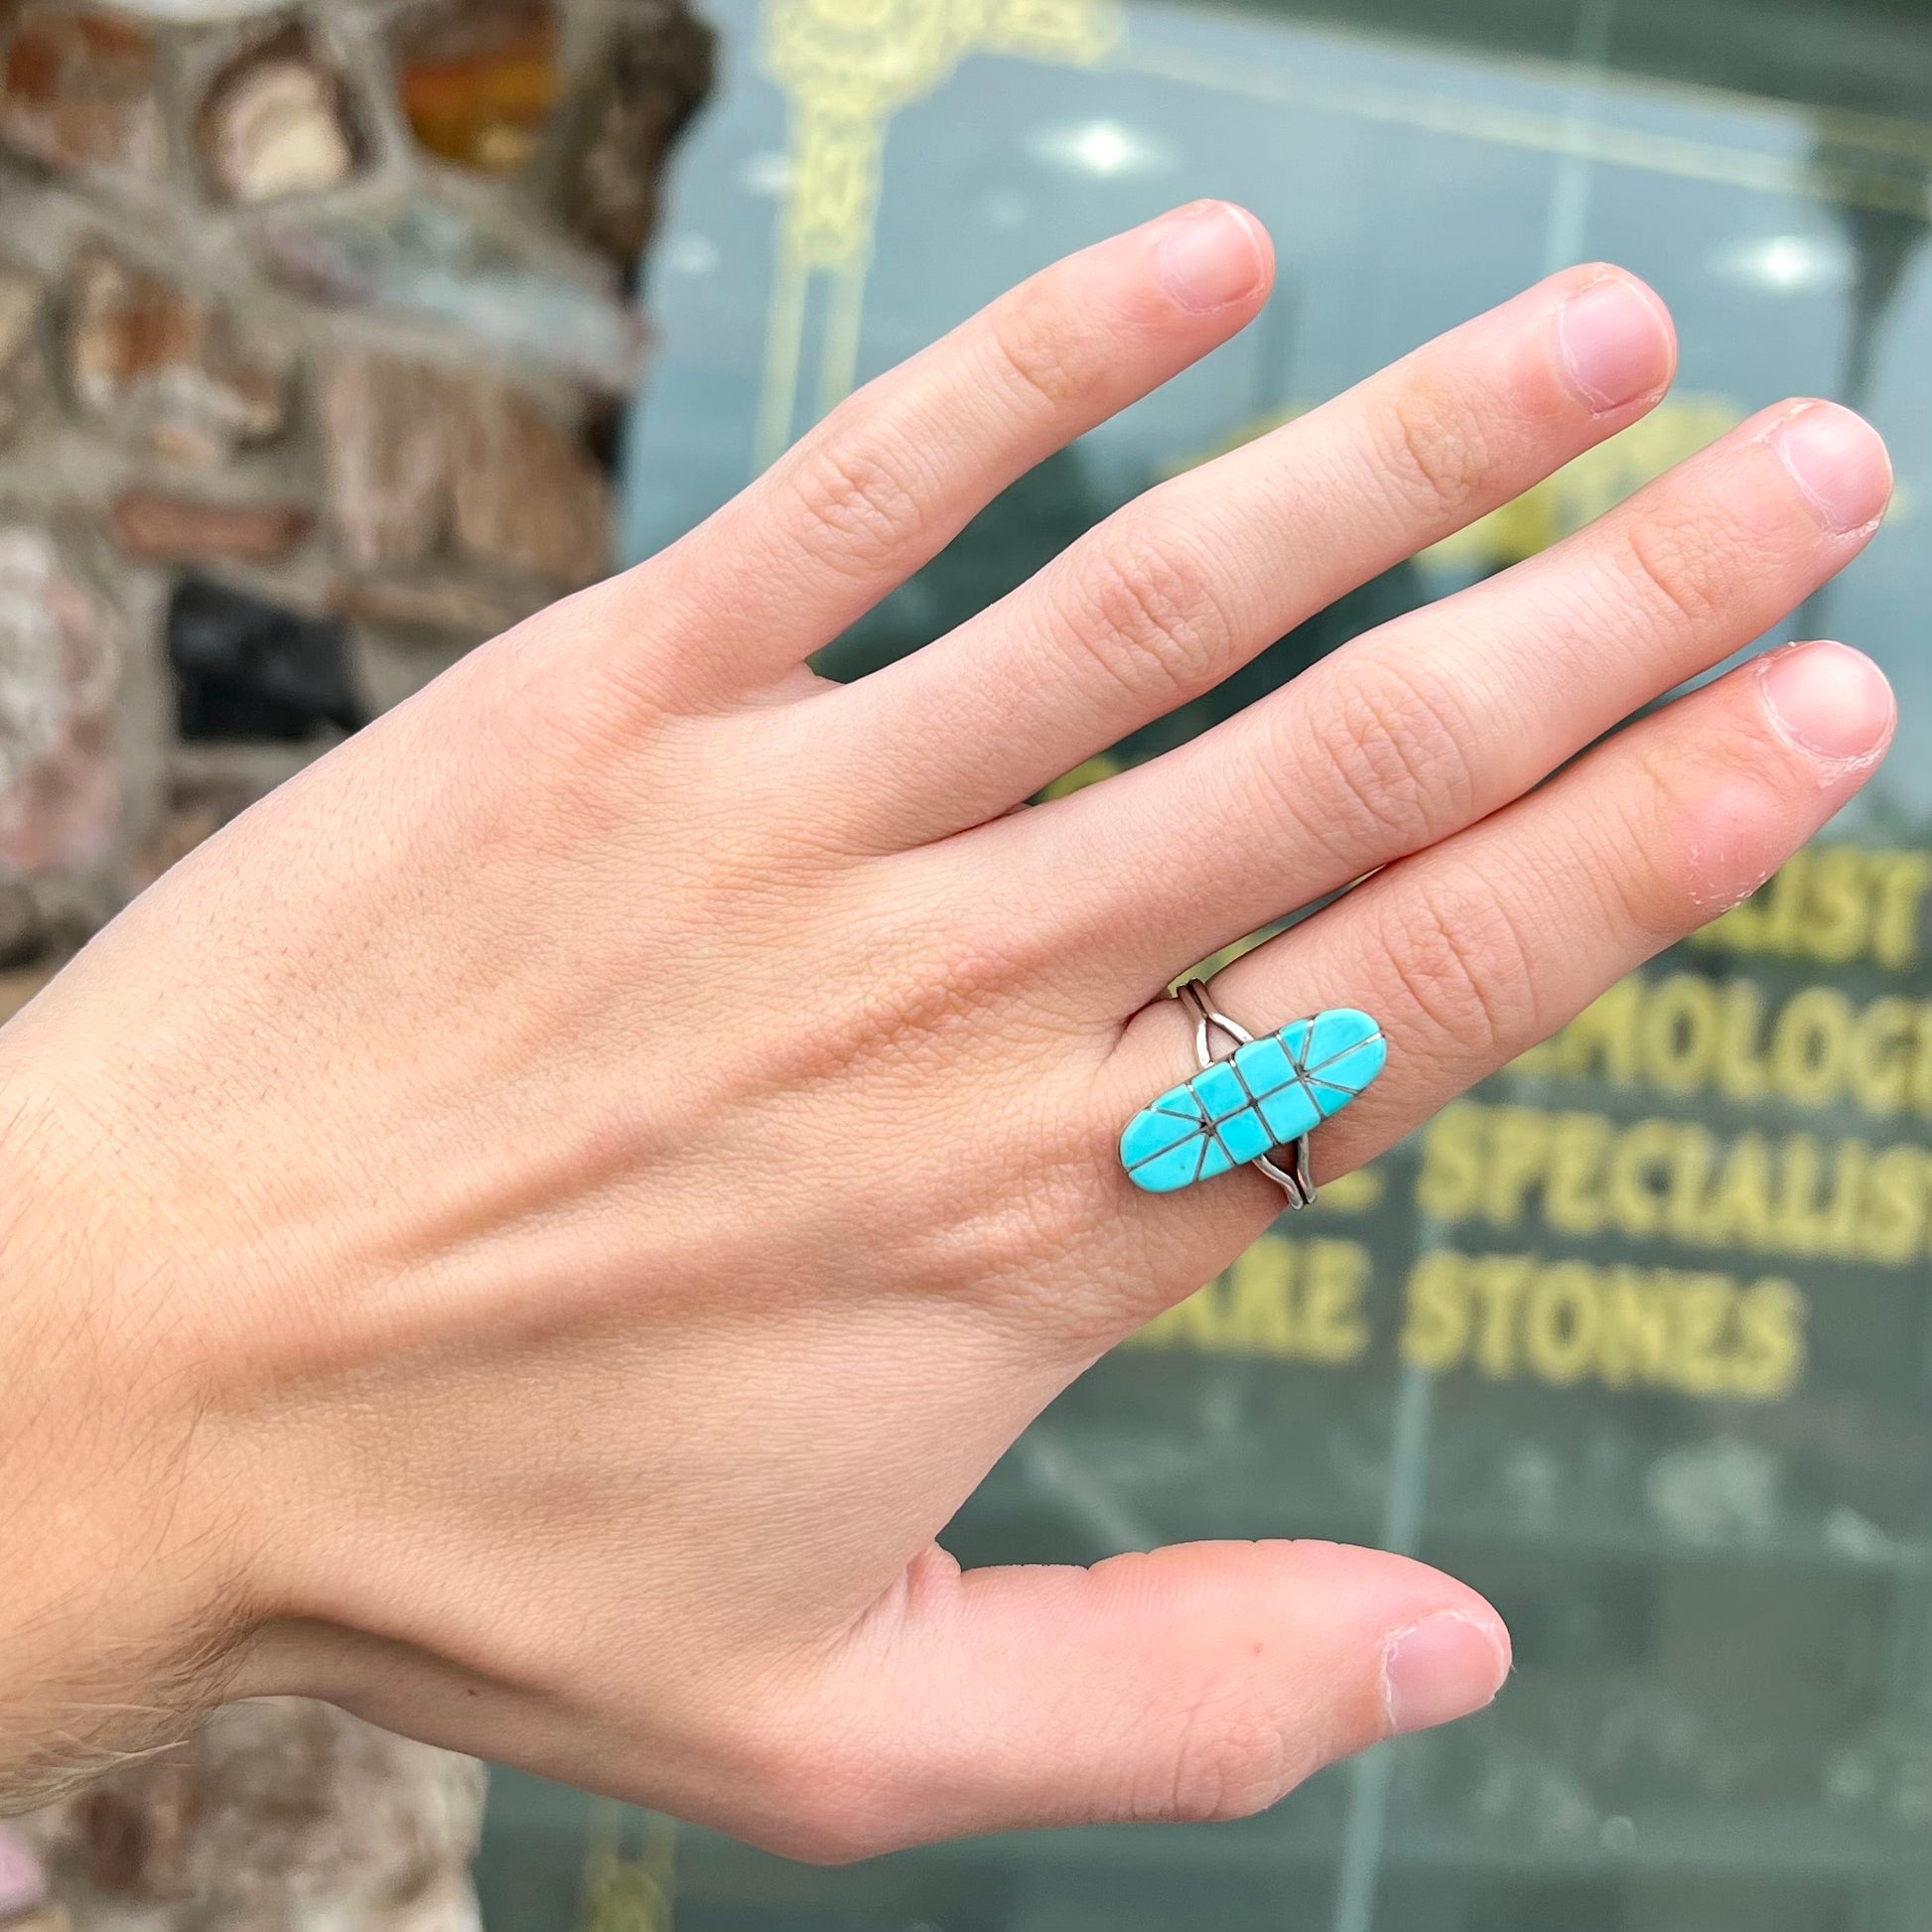 A handmade silver turquoise ring inlaid with six pieces of Sleeping Beauty turquoise.  The back of the ring is signed "FT".